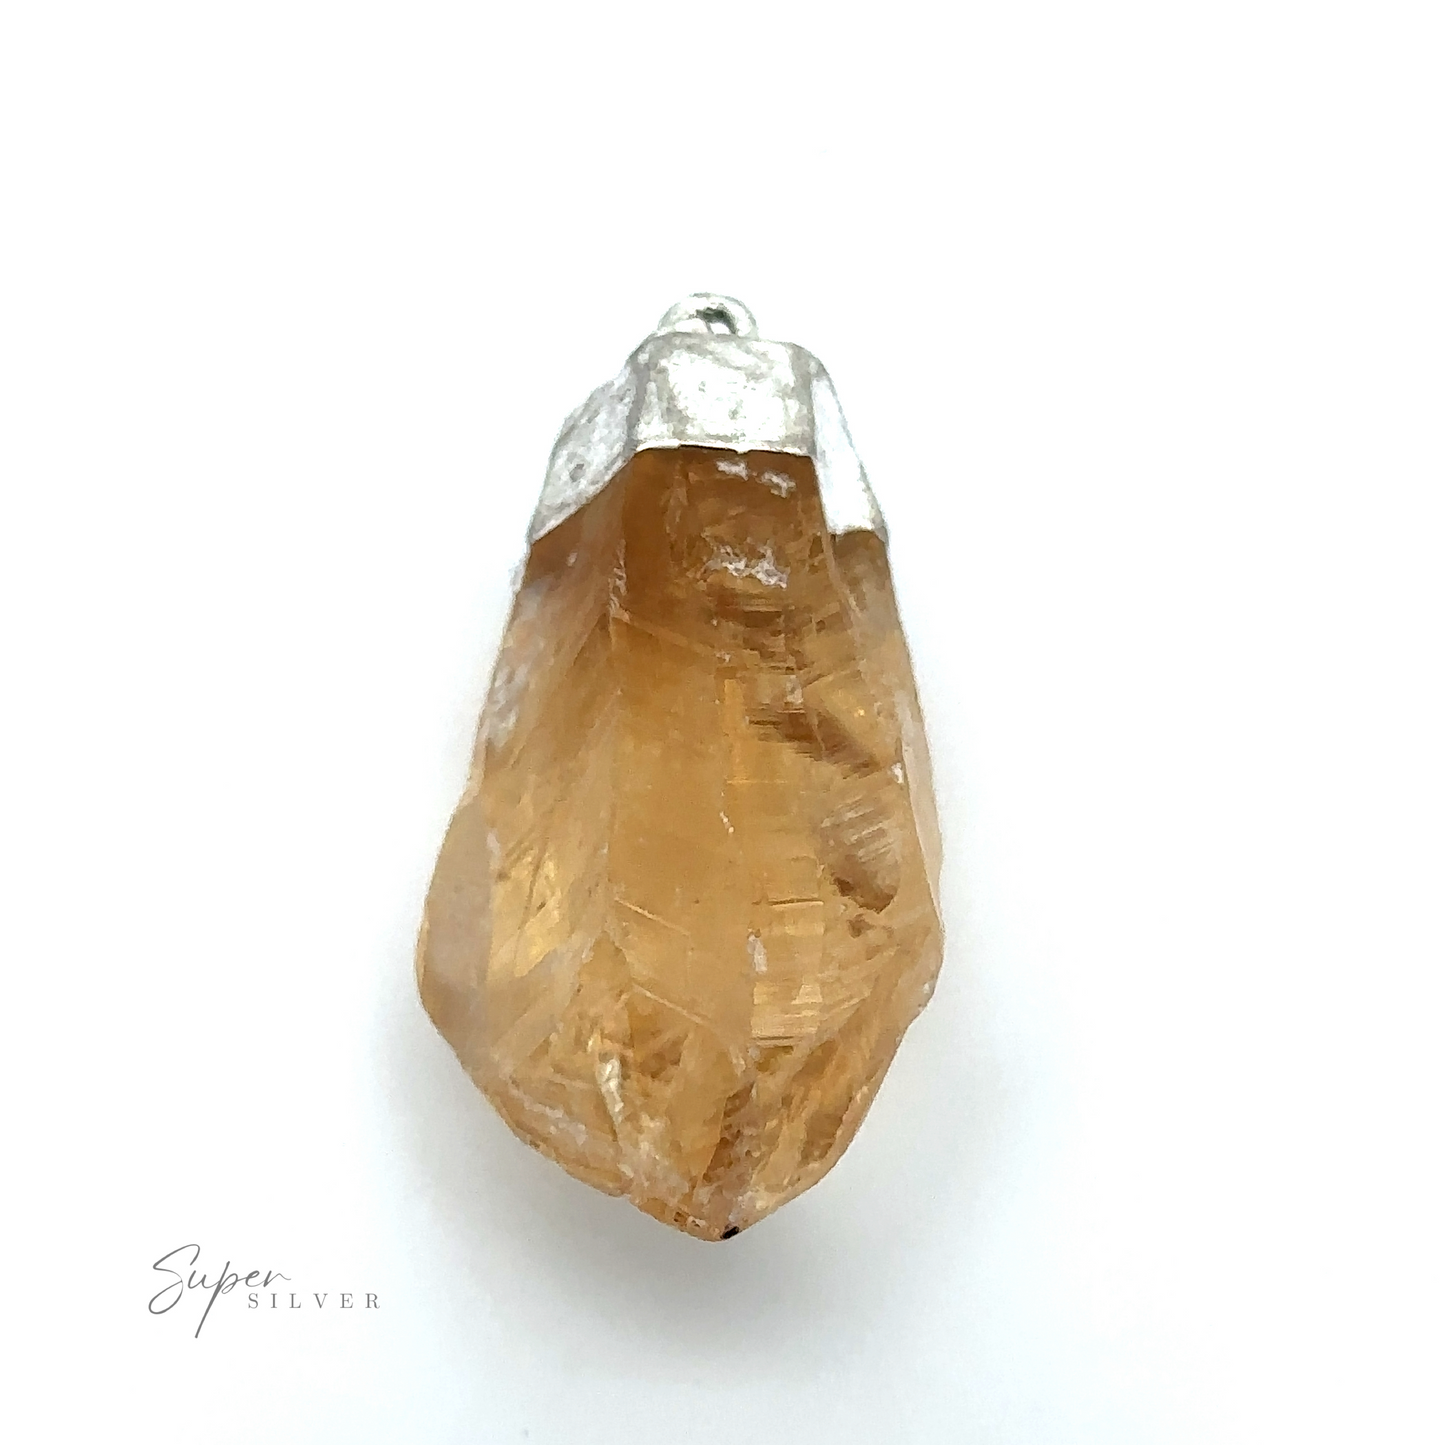 
                  
                    A Raw Crystal Pendant With Silver Cap featuring a raw citrine crystal with a silver cap and loop for attaching to a chain, set against a plain white background. The logo "Super Silver" is visible in the lower-left corner.
                  
                